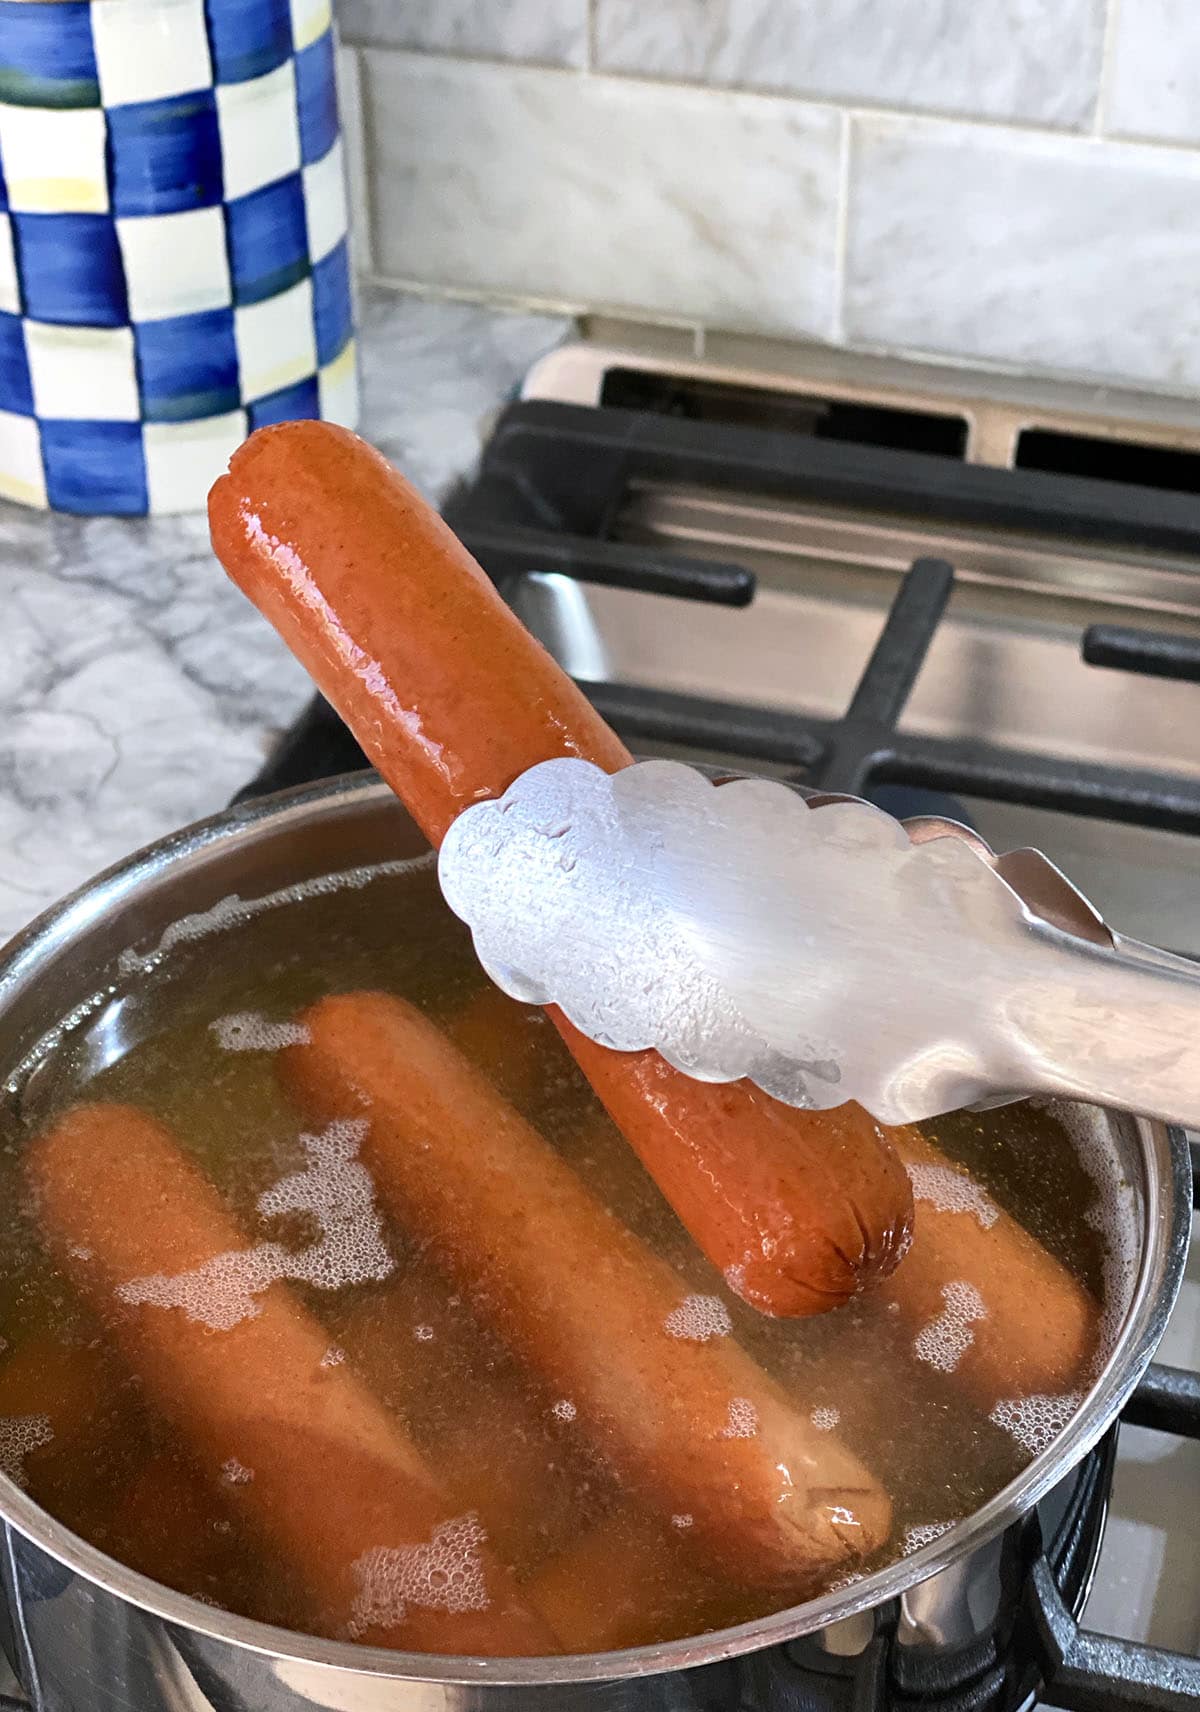 A pair of silver tongs is lifting a hot dog from a pot of boiling water.